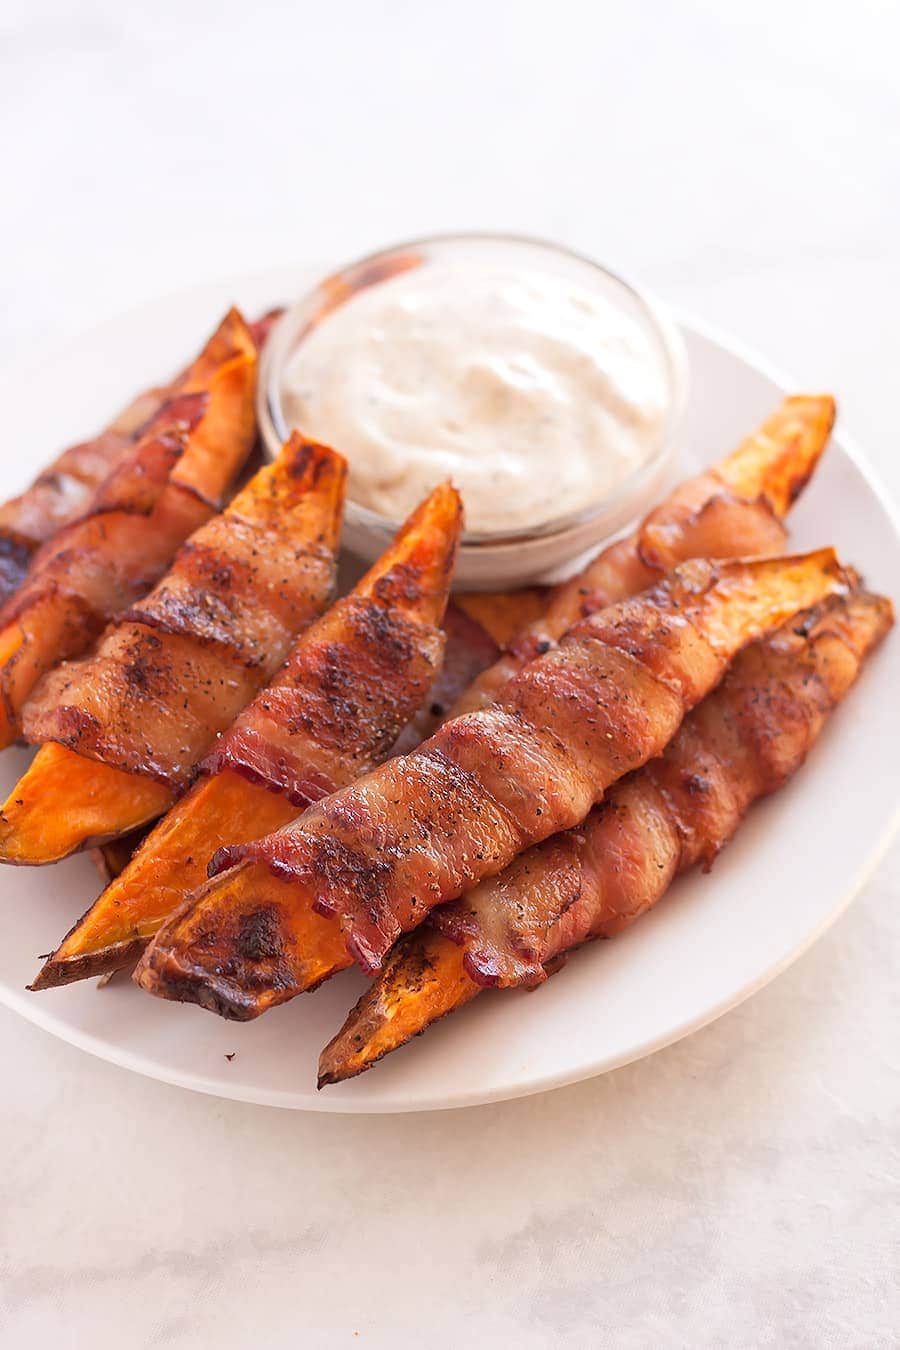 Sweet potatoes cut into fries, seasoned with salt, pepper, and smoked paprika, then wrapped in uncured applewood smoked bacon and baked to perfection!